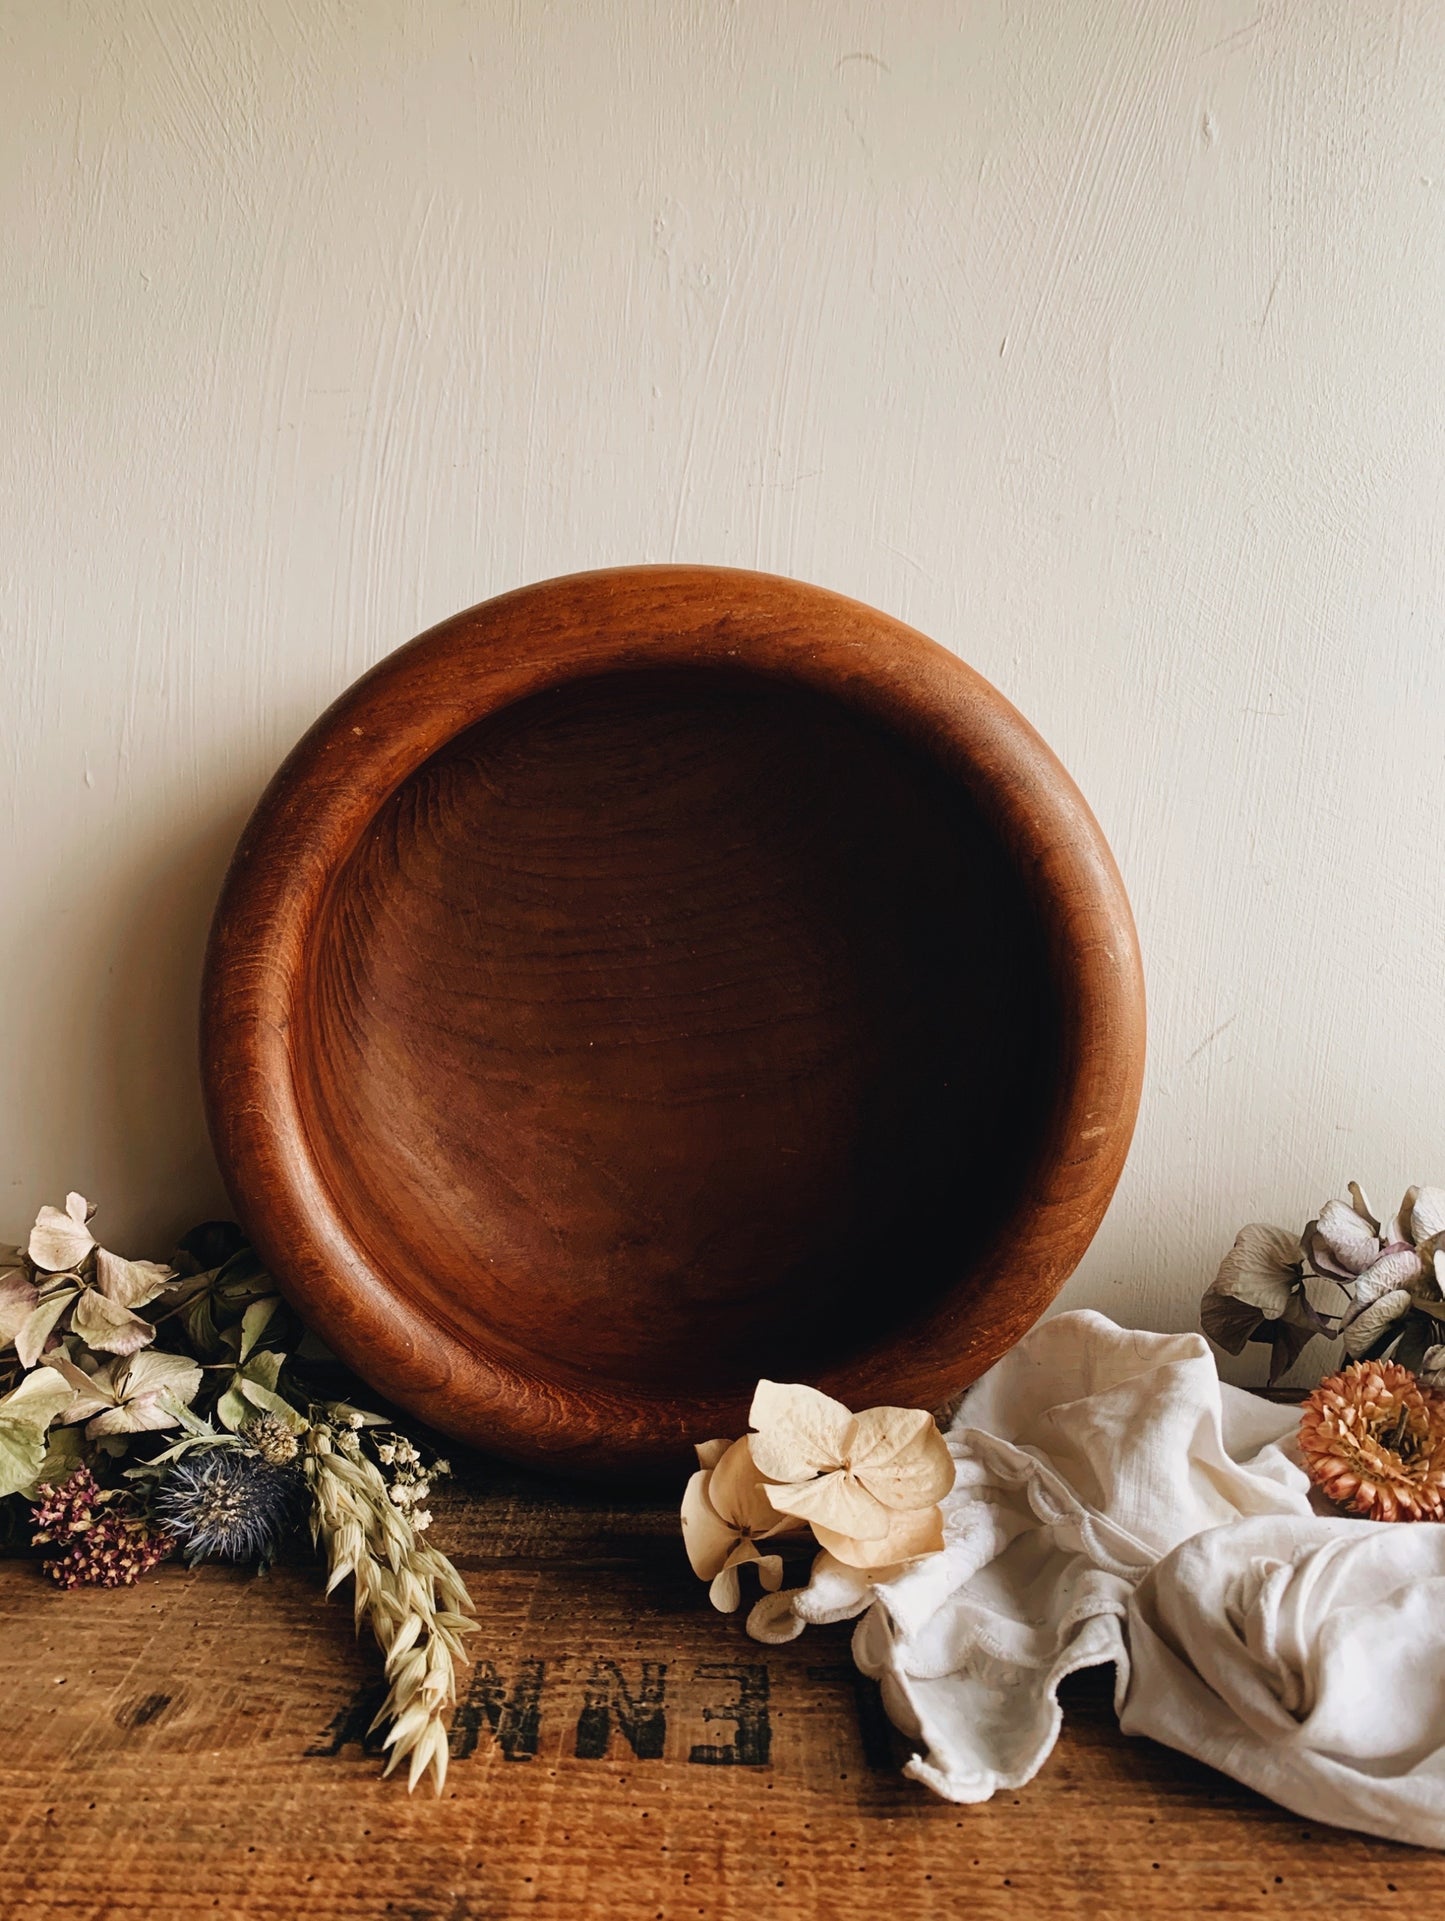 Large Vintage Rustic Handmade Wooden Bowl (UK shipping ONLY)